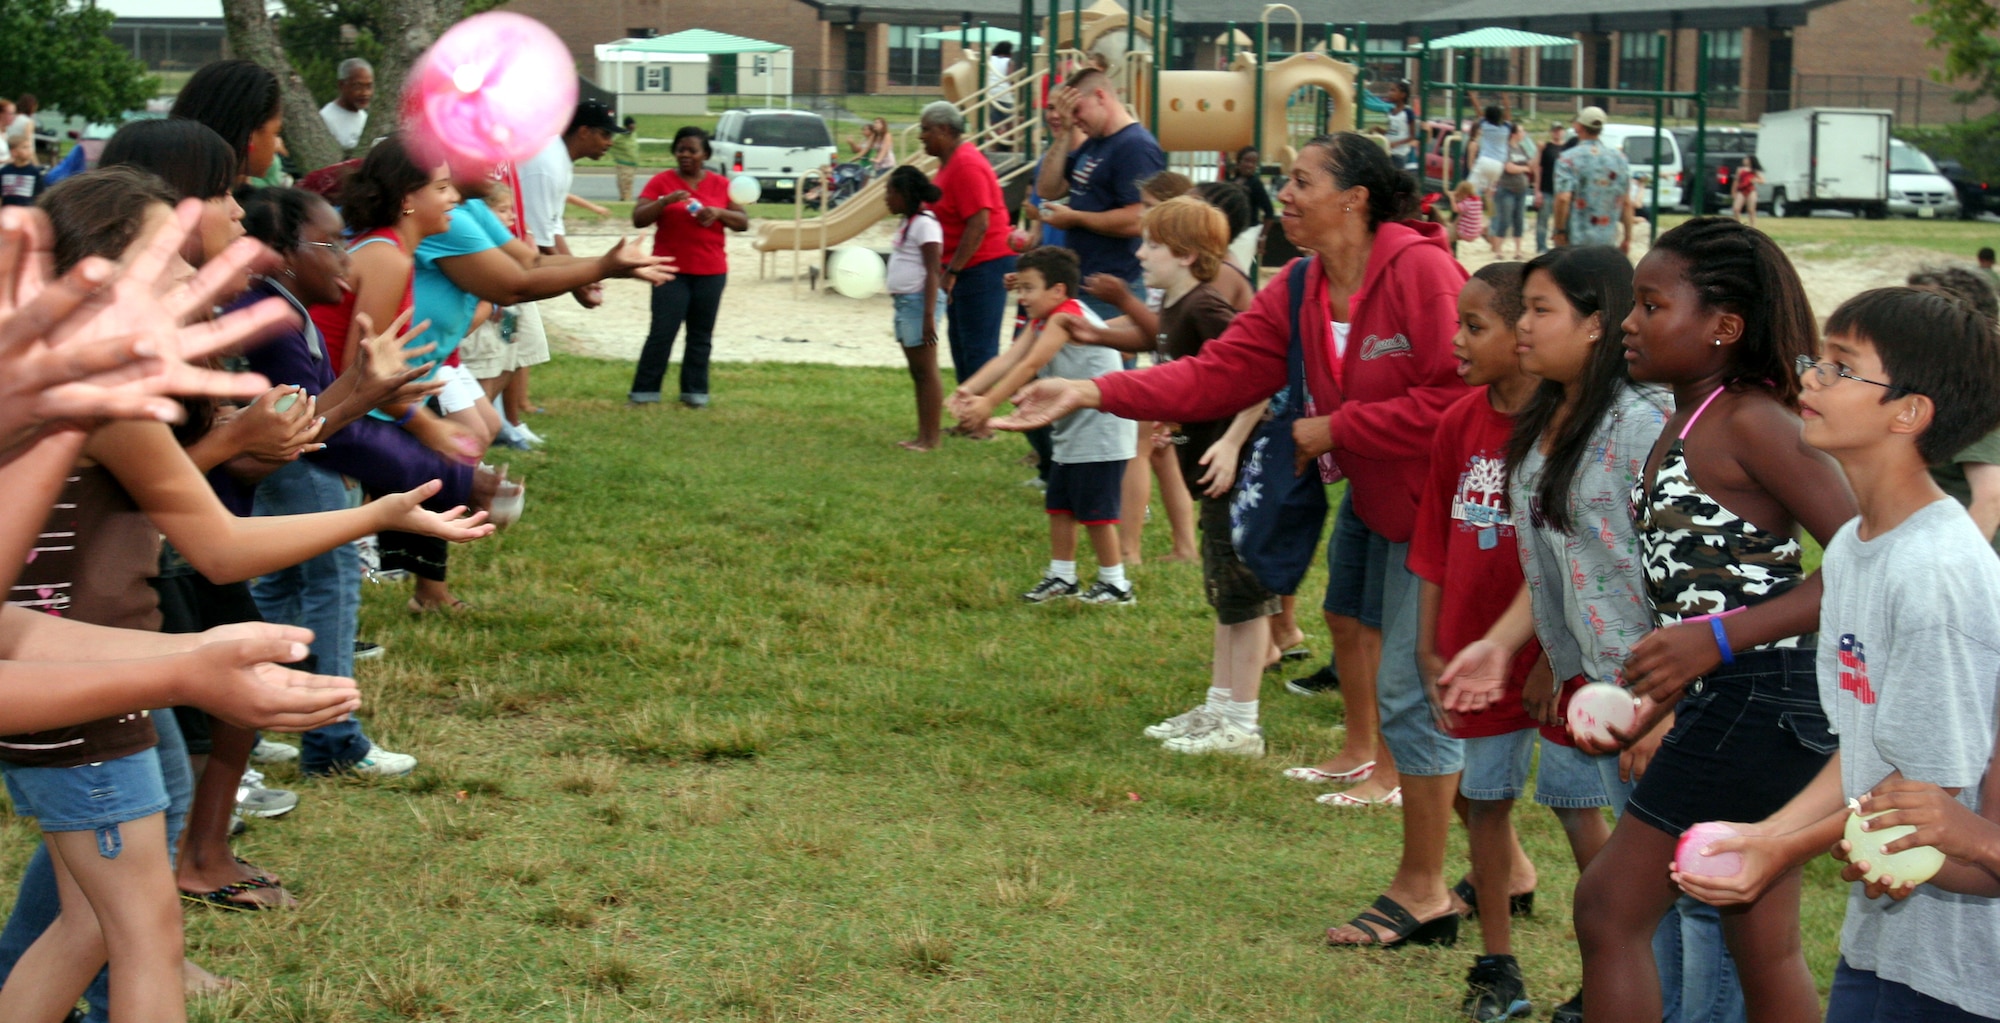 Members of the Bolling community participate in a water balloon toss July 4 during the 6th Annual Freedom Fest at Bolling Green Park. (U.S. Air Force photo by George Scott)